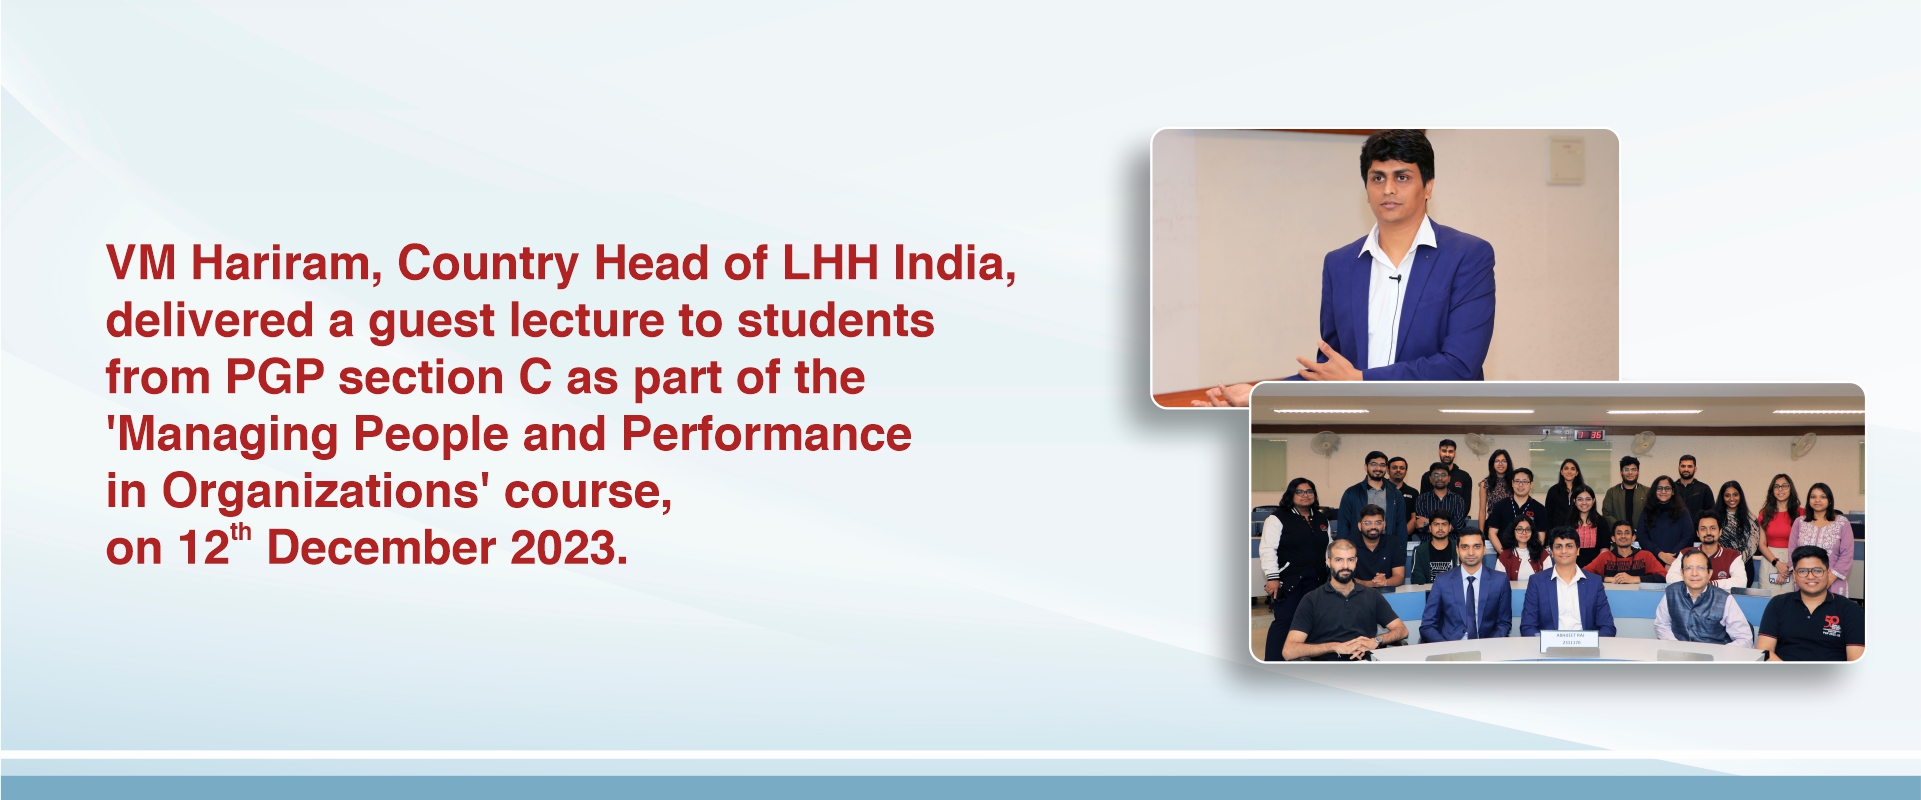 VM Hariram, Country Head of LHH India, delivered a guest lecture to students from PGP section C as part of the 'Managing People and Performance in Organizations' course, on 12th December 2023